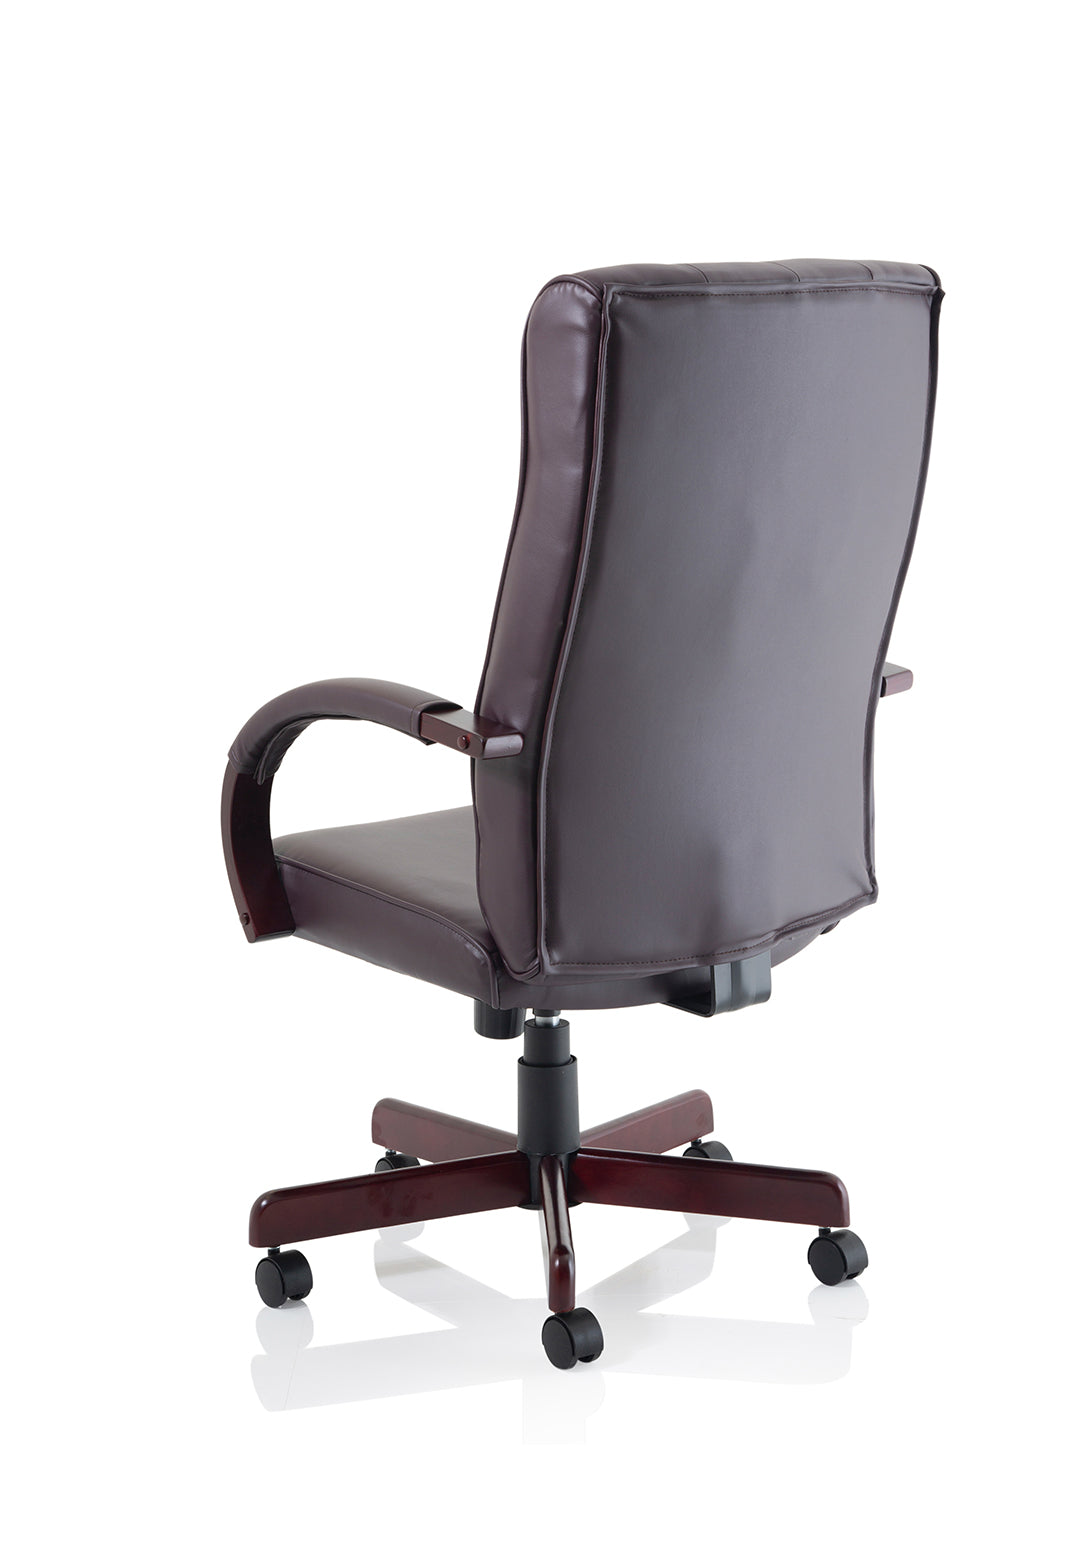 Chesterfield High Back Leather Executive Office Chair with Arms